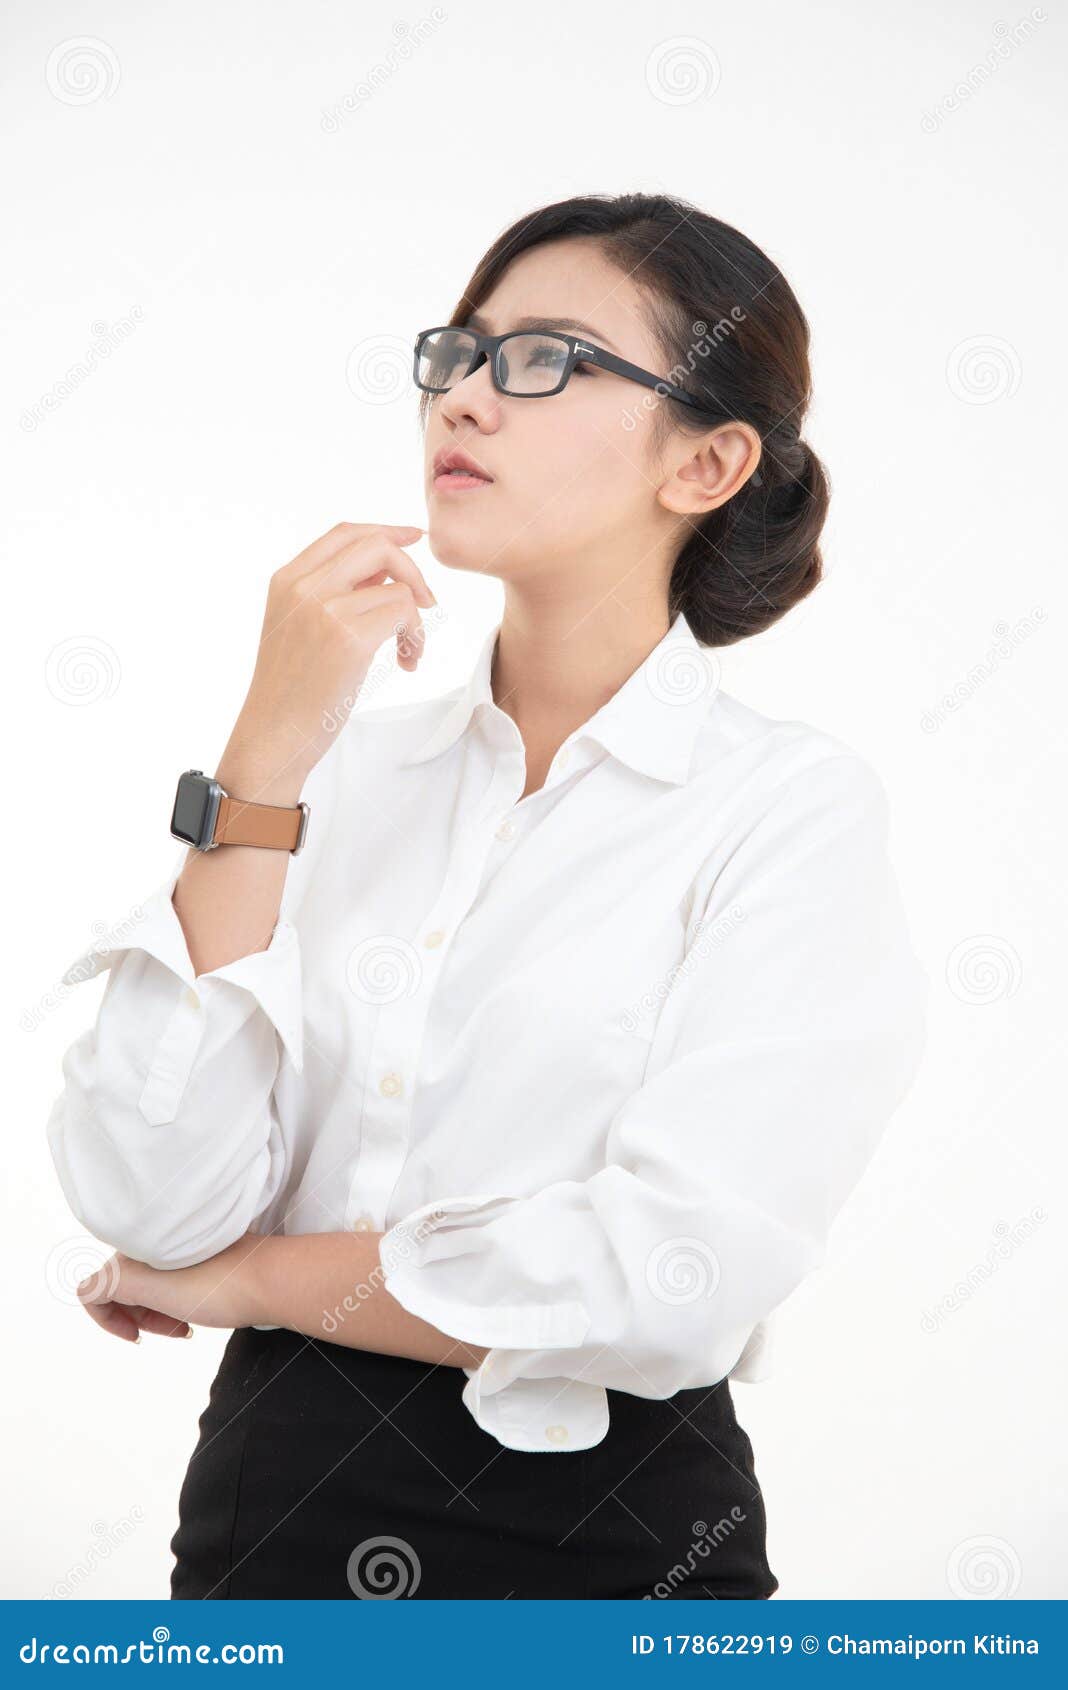 https://thumbs.dreamstime.com/z/portrait-happy-charming-asian-young-woman-white-collar-shirt-looks-away-to-side-thinks-plan-positive-isolated-over-178622919.jpg